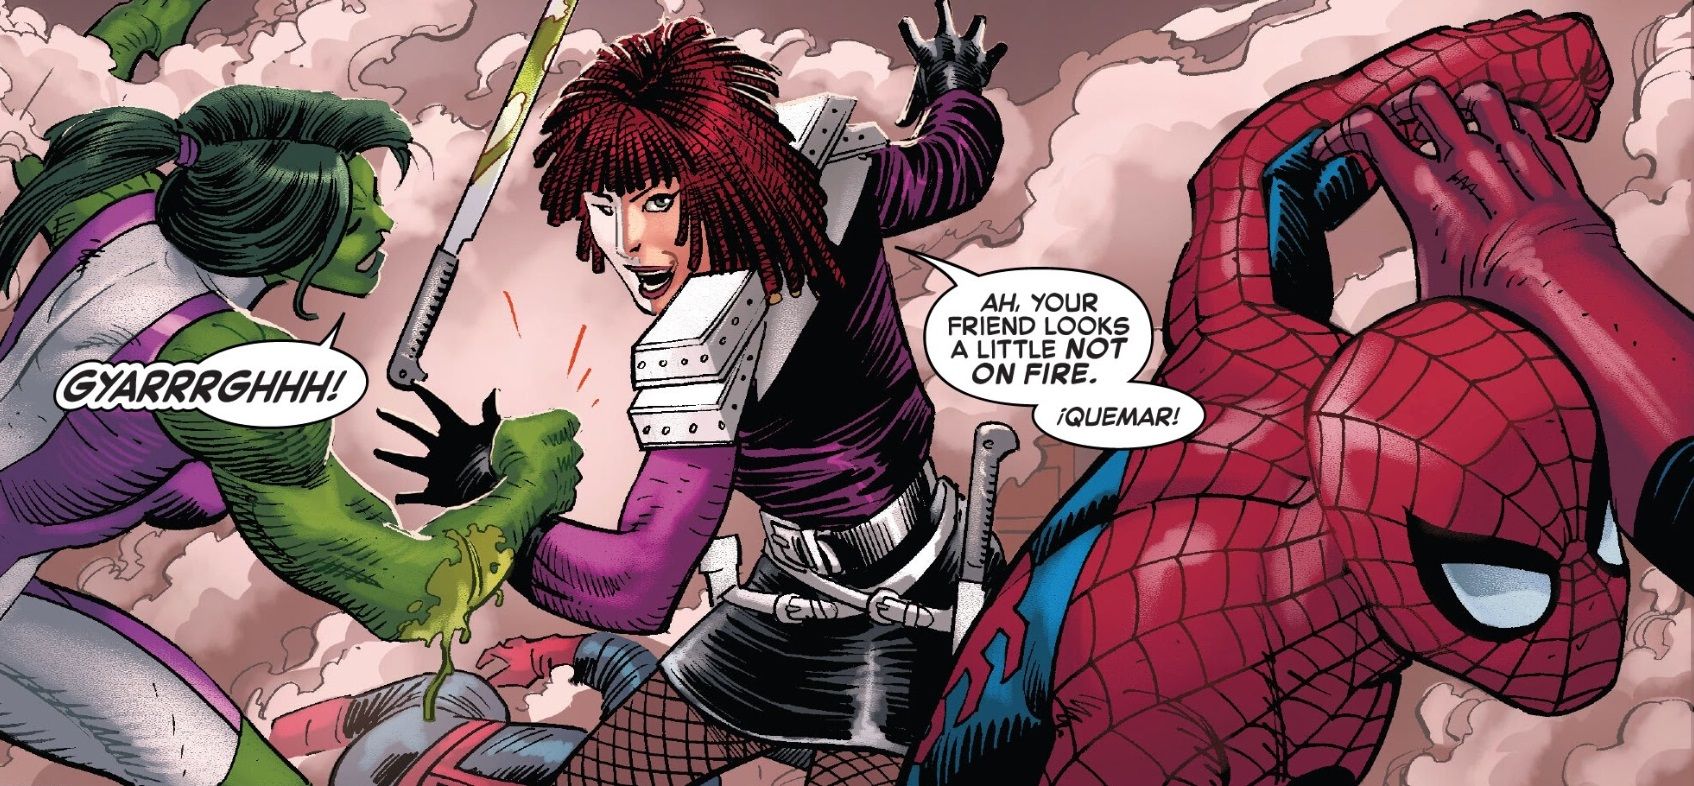 She-Hulk's blood drips conspicuously from the wound in her arm as she sends Typhoid Mary's sword - also coated in green blood - flying from Mary's hands. Mary's attention is on Spider-Man, who she is about to set on fire.